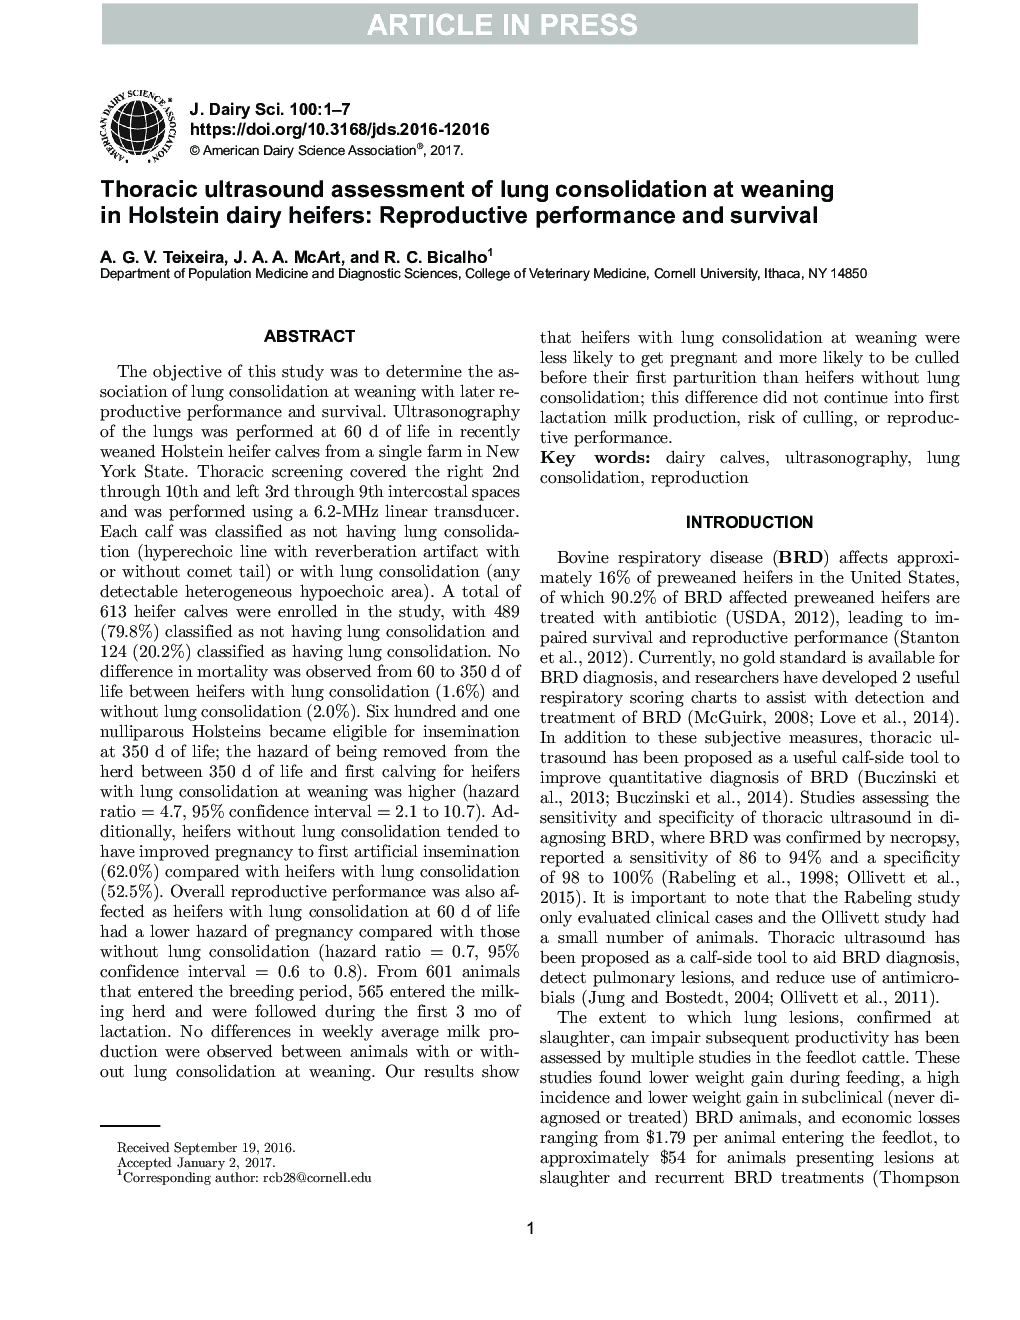 Thoracic ultrasound assessment of lung consolidation at weaning in Holstein dairy heifers: Reproductive performance and survival